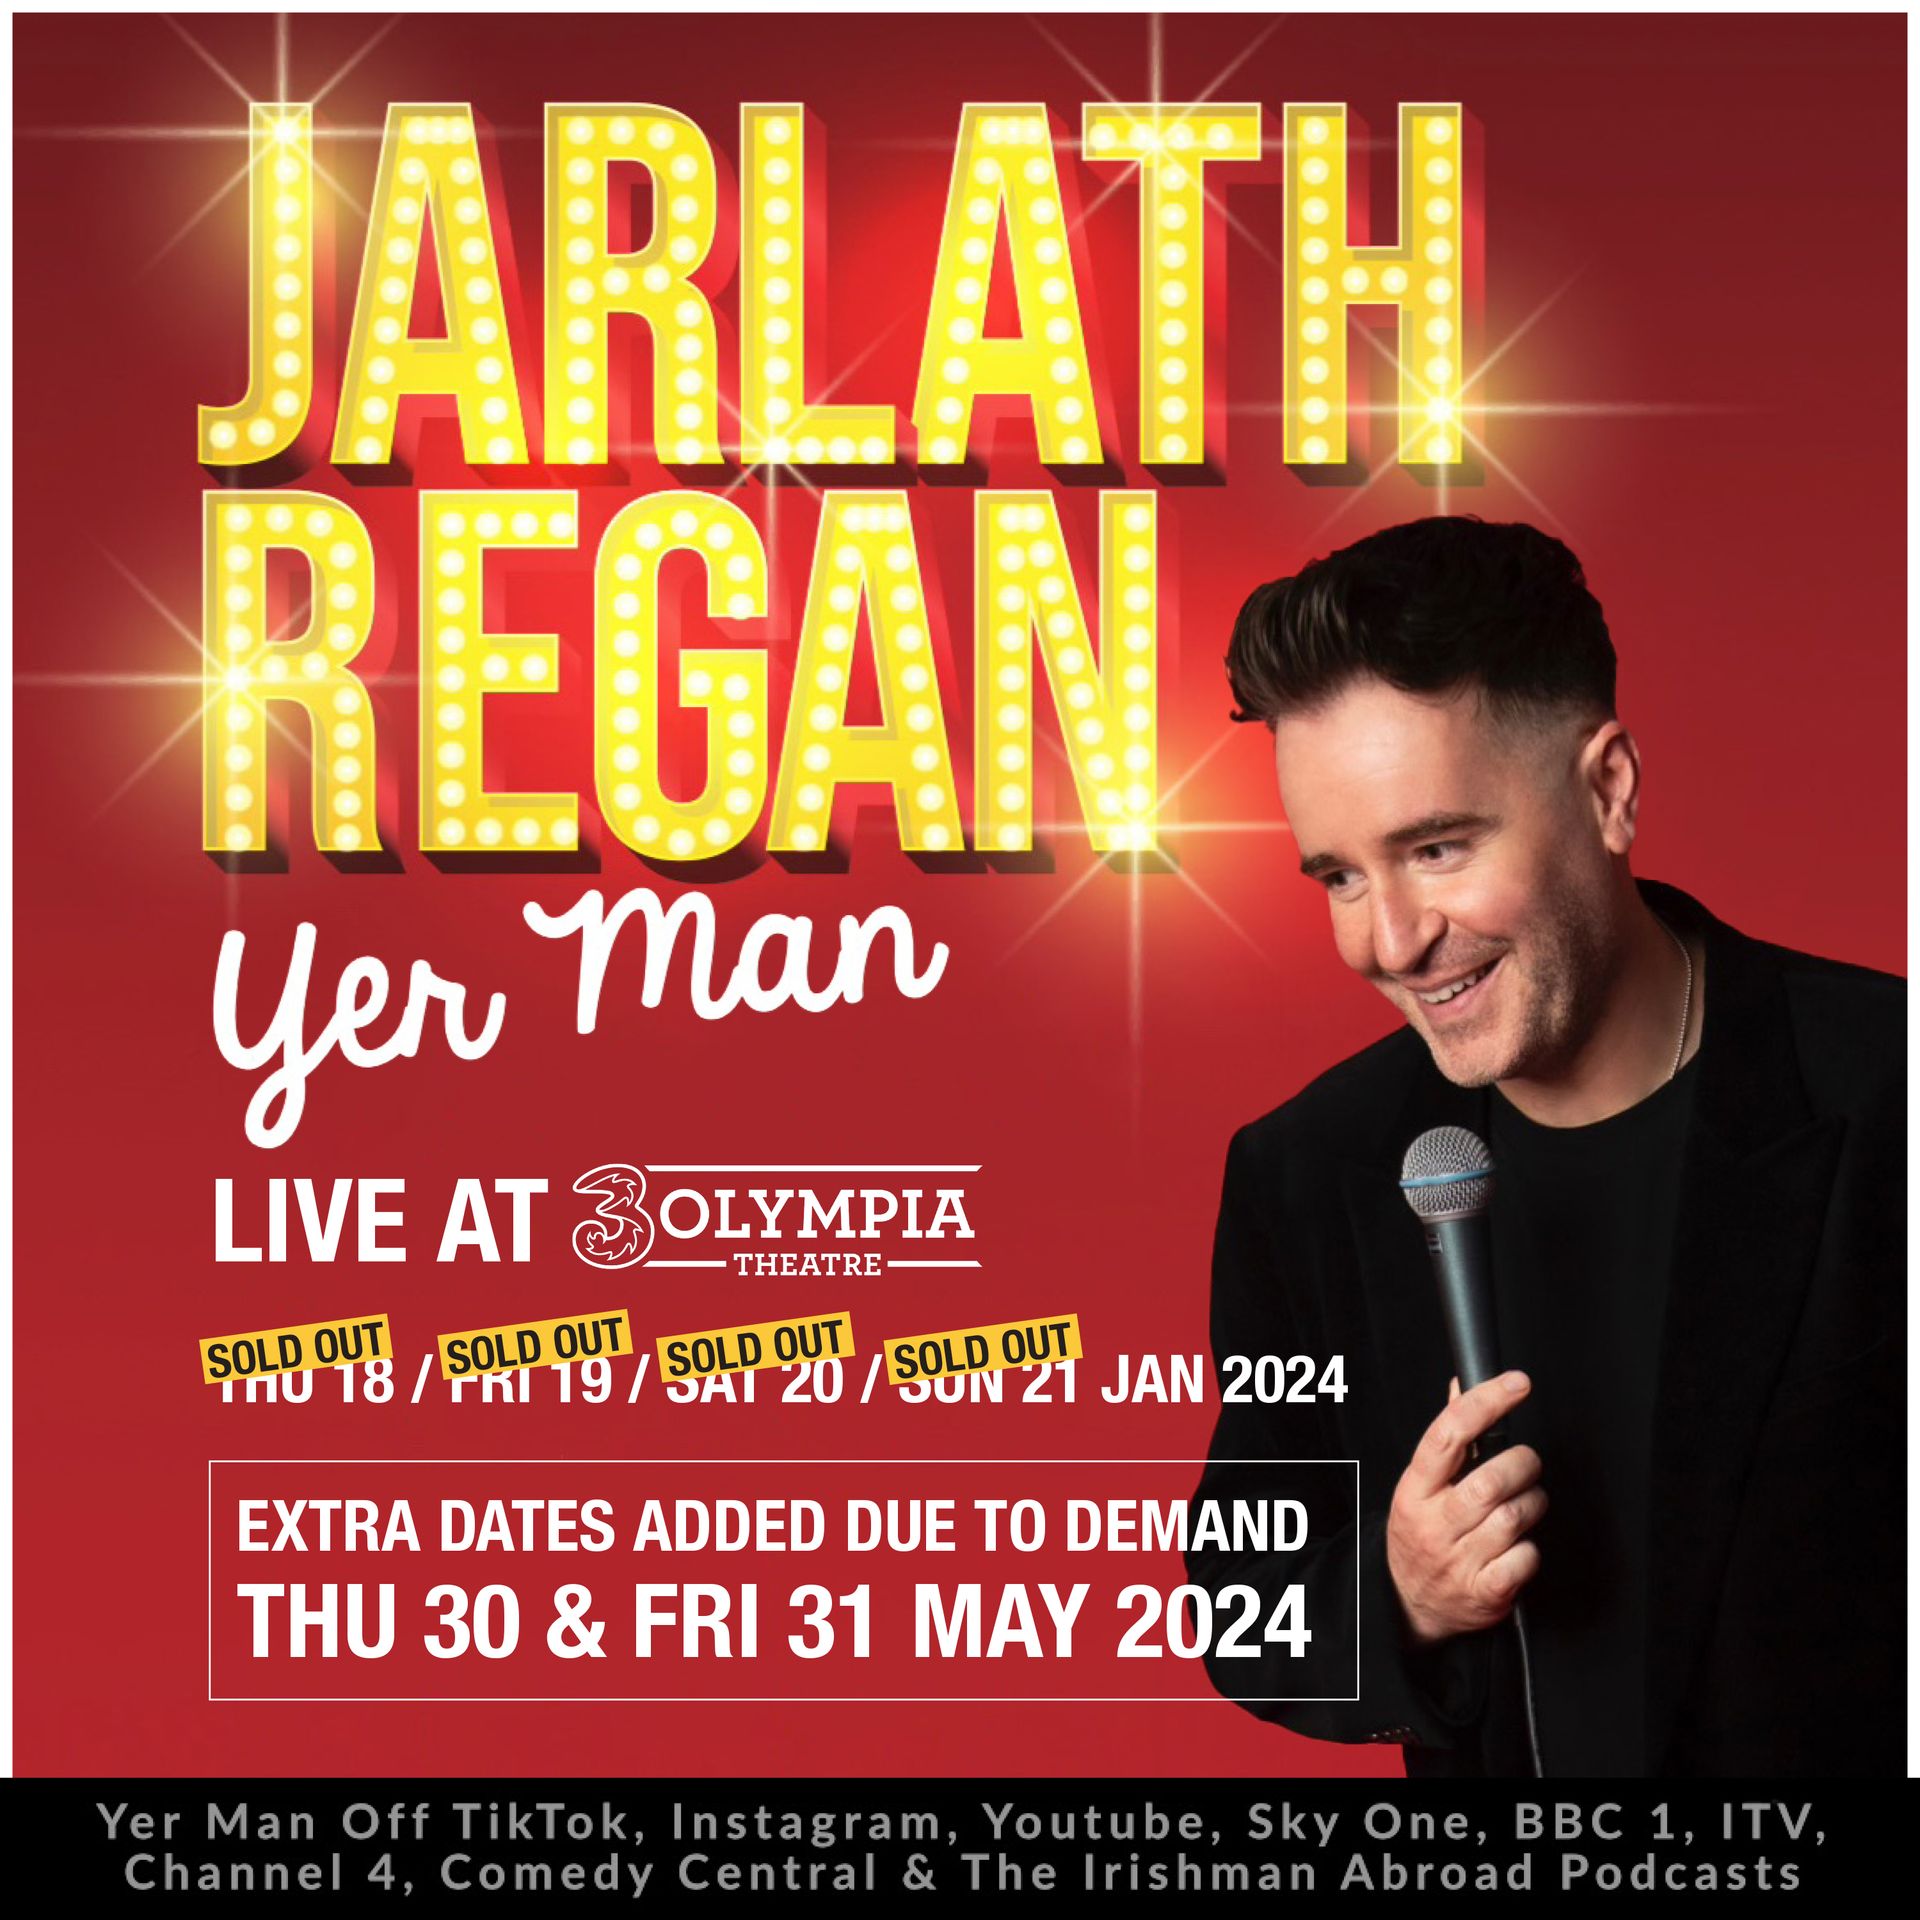 Due to demand Jarlath Regan has added two extra shows at 3Olympia Theatre, Dublin on Thursday 30th and Friday 31st May 2024.
His dates on Thursday 18th, Friday 19th, Saturday 20th and Sunday 21st January are sold-out!
